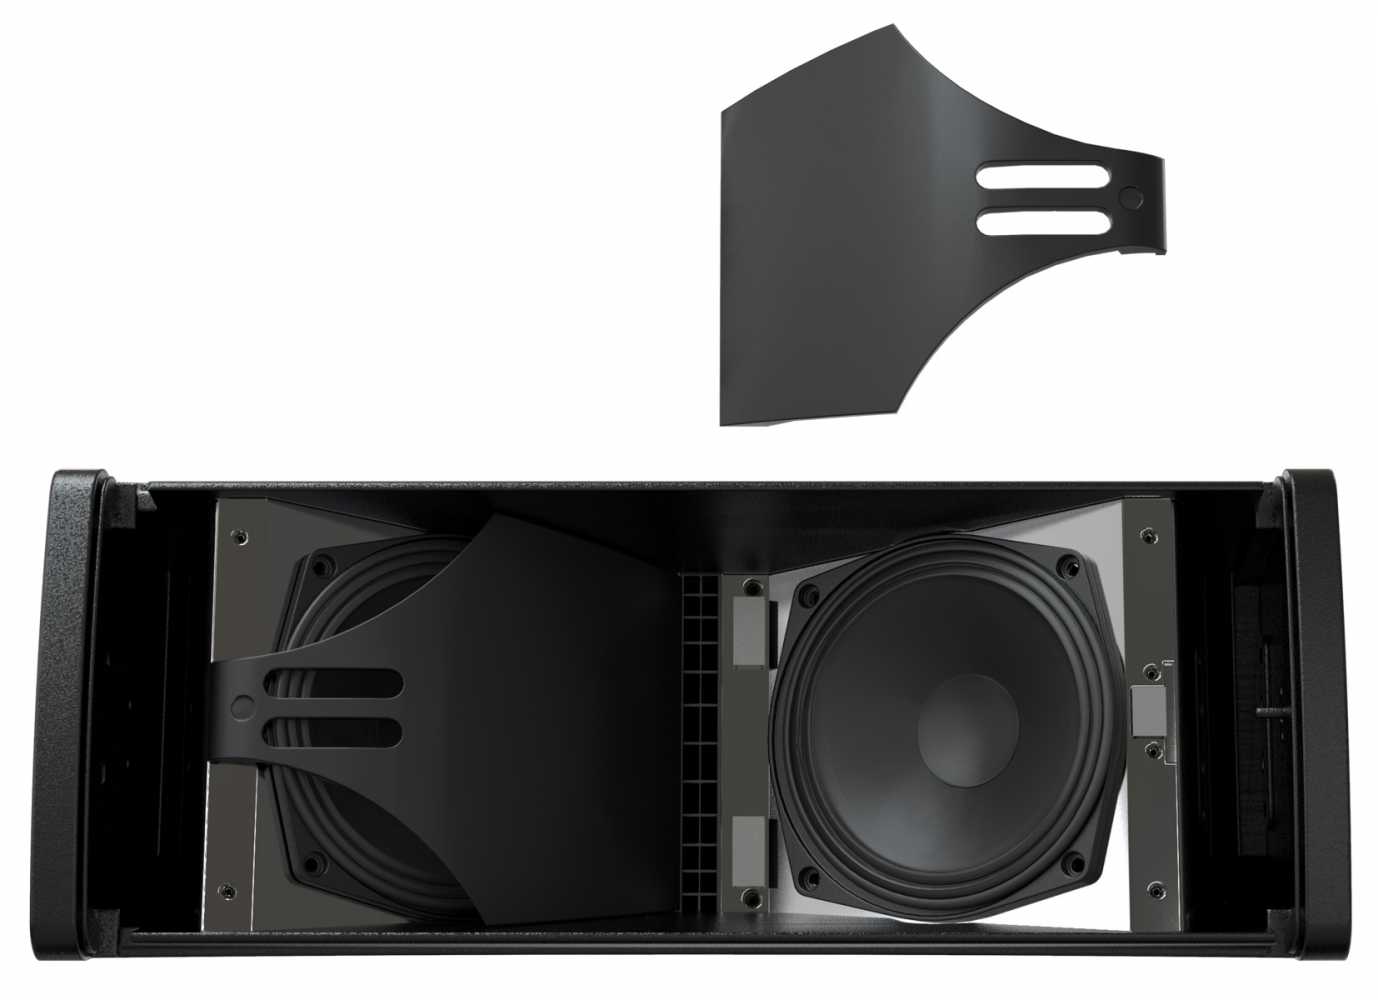 N-APS is the smaller sibling of Coda Audio’s APS system